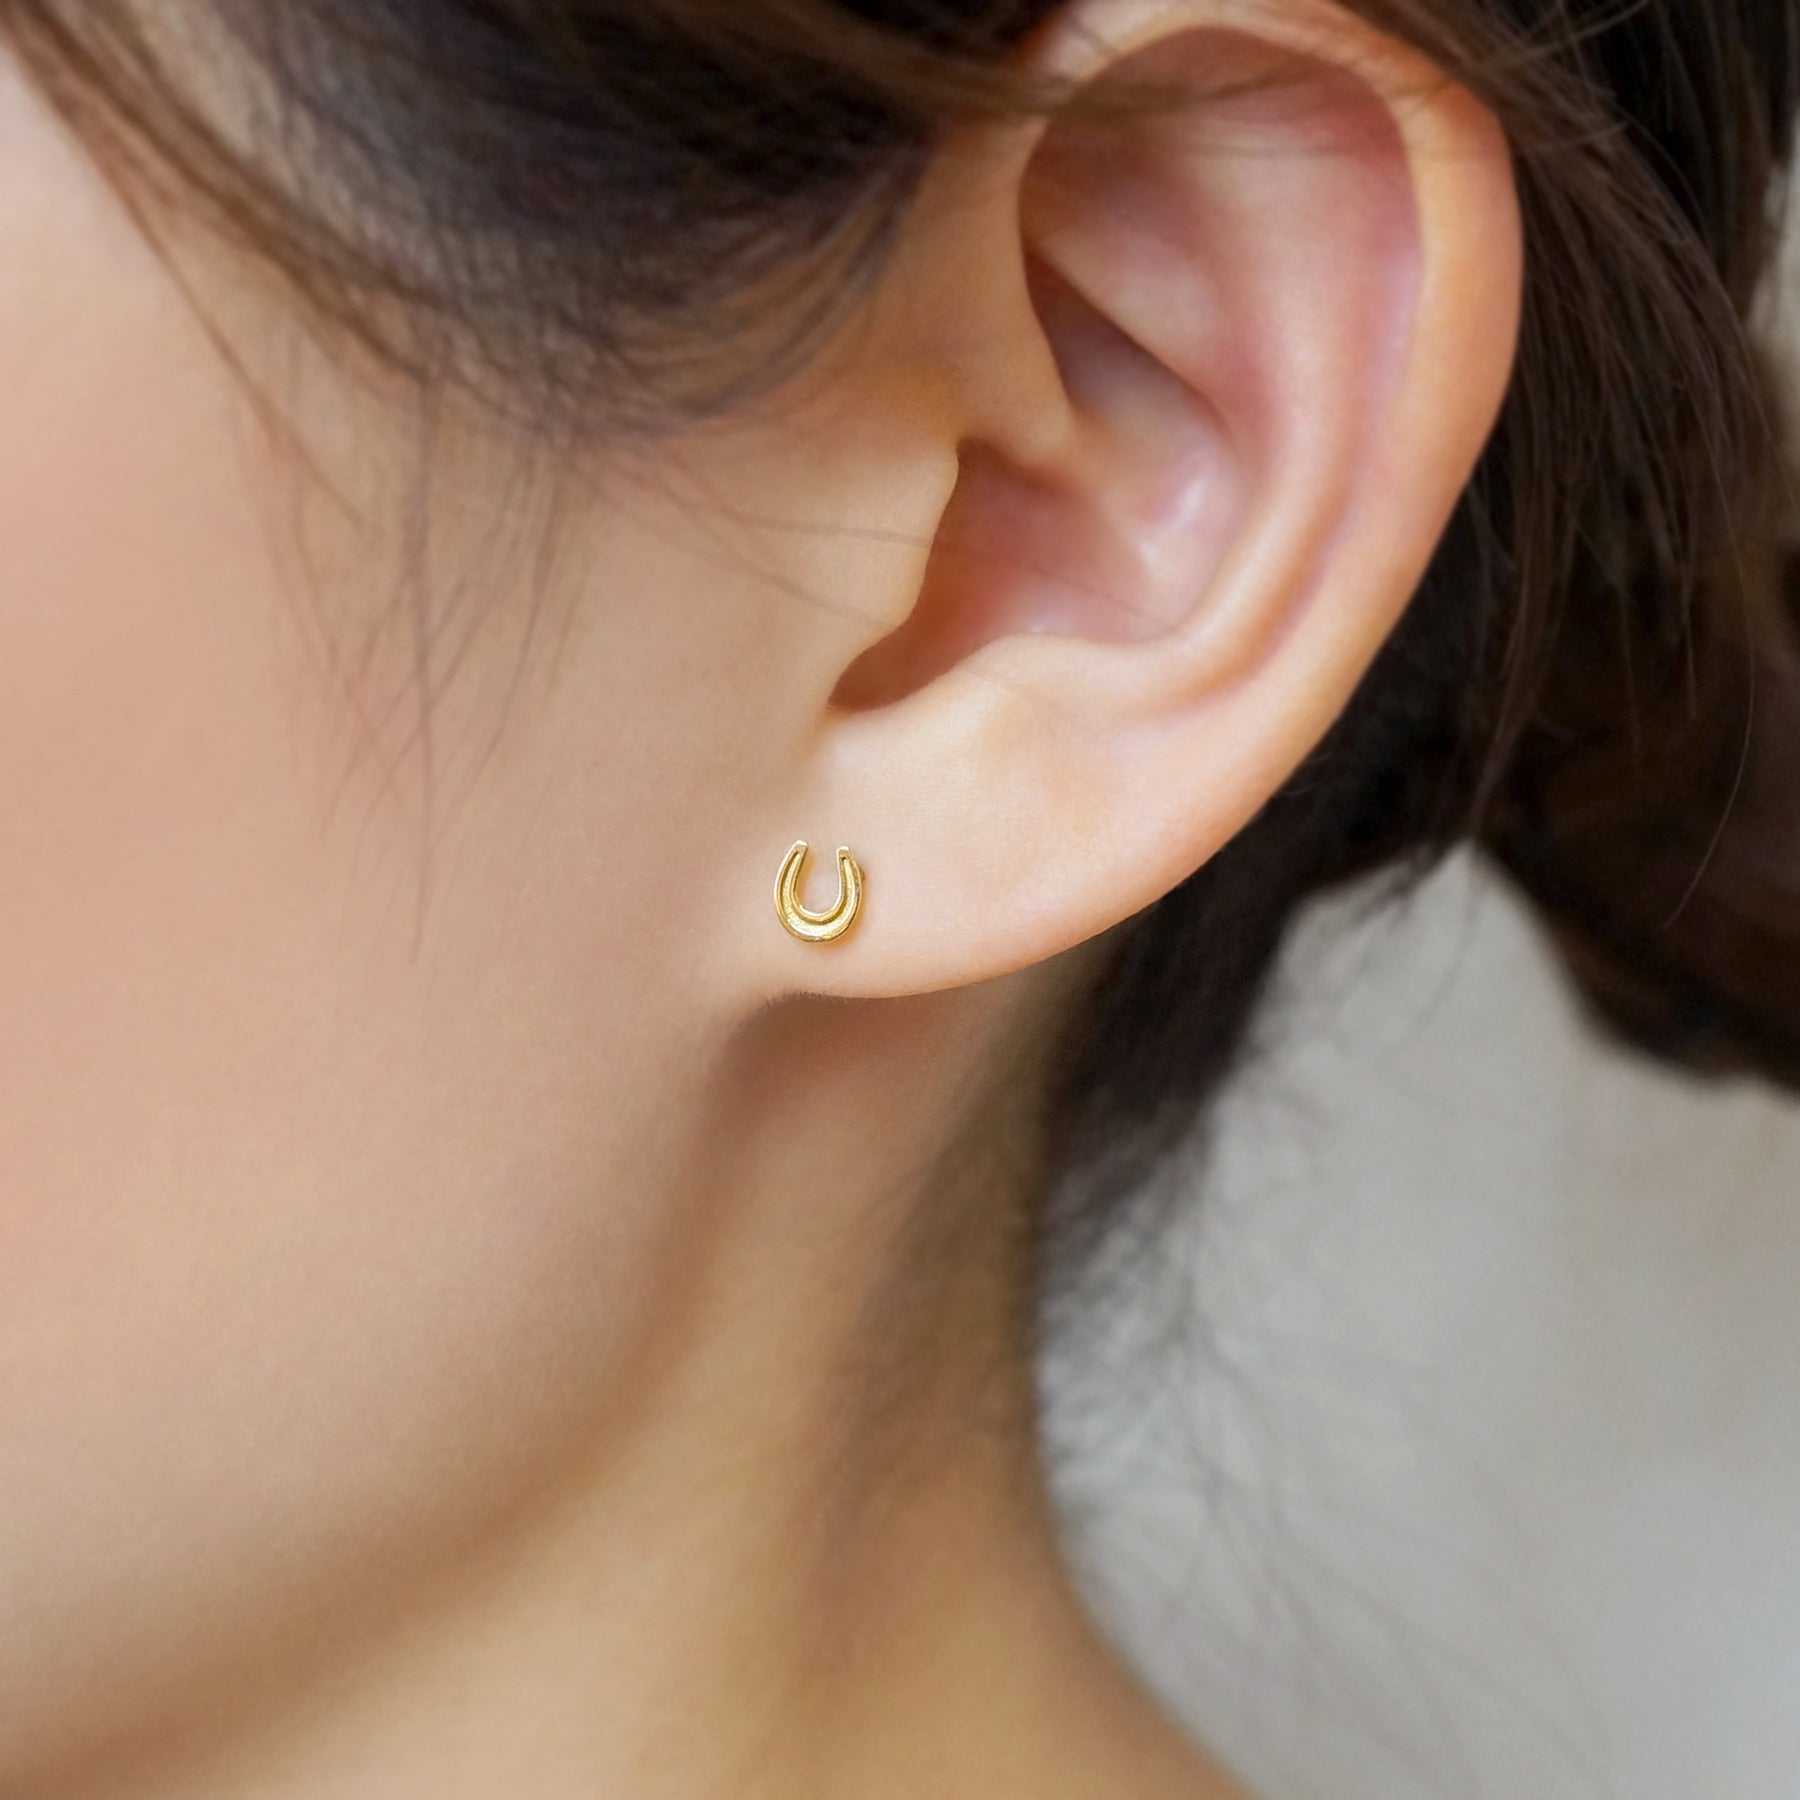 Share more than 156 second earrings gold